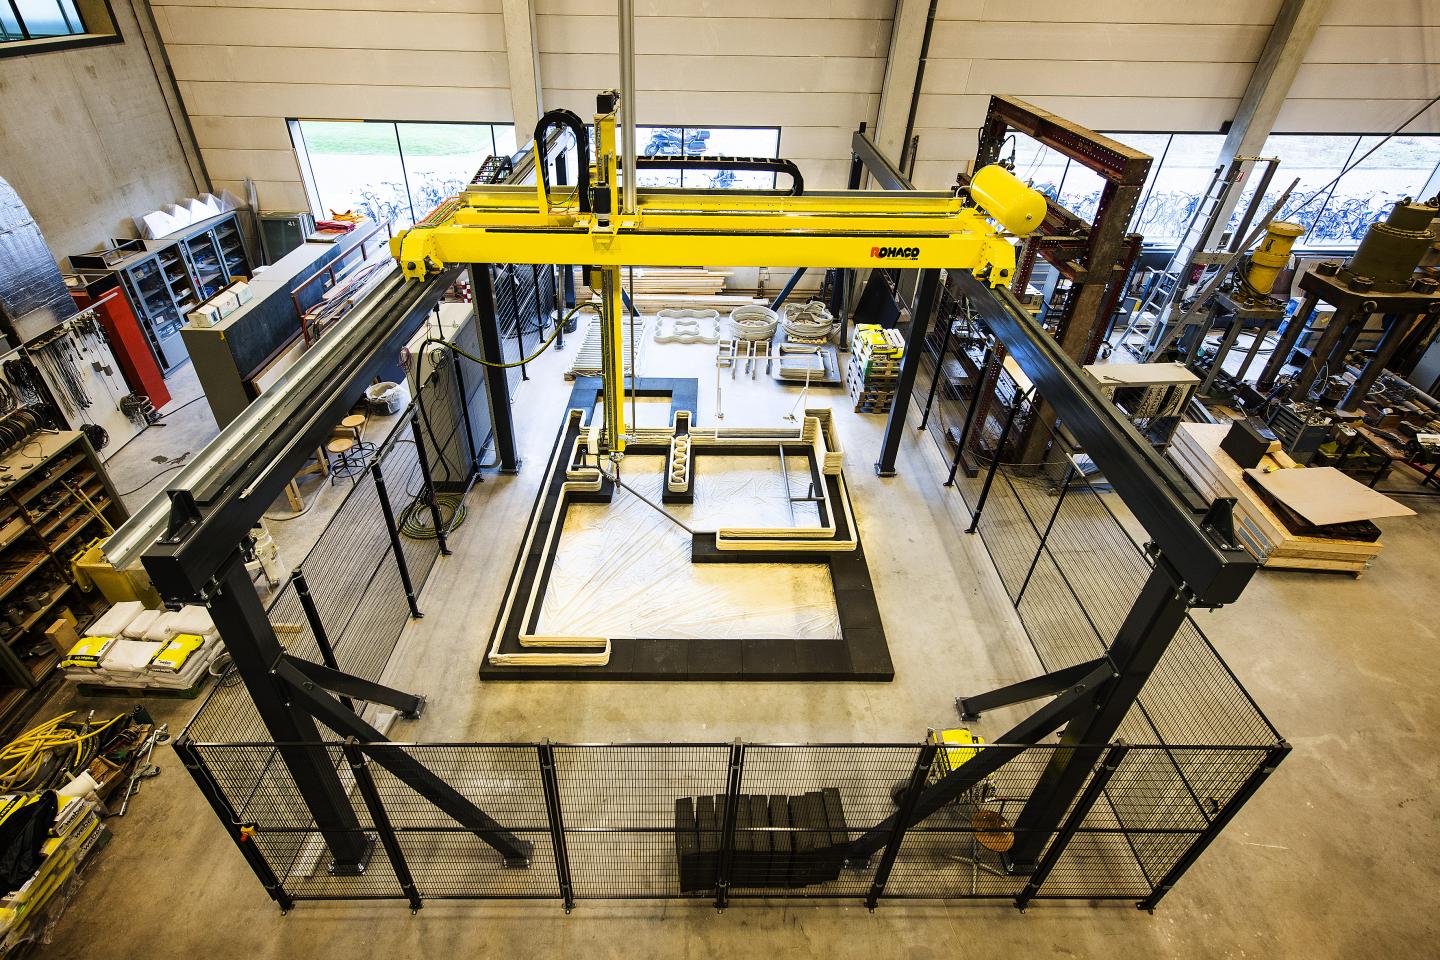 Top View of the Concrete Printer of TU Eindhoven